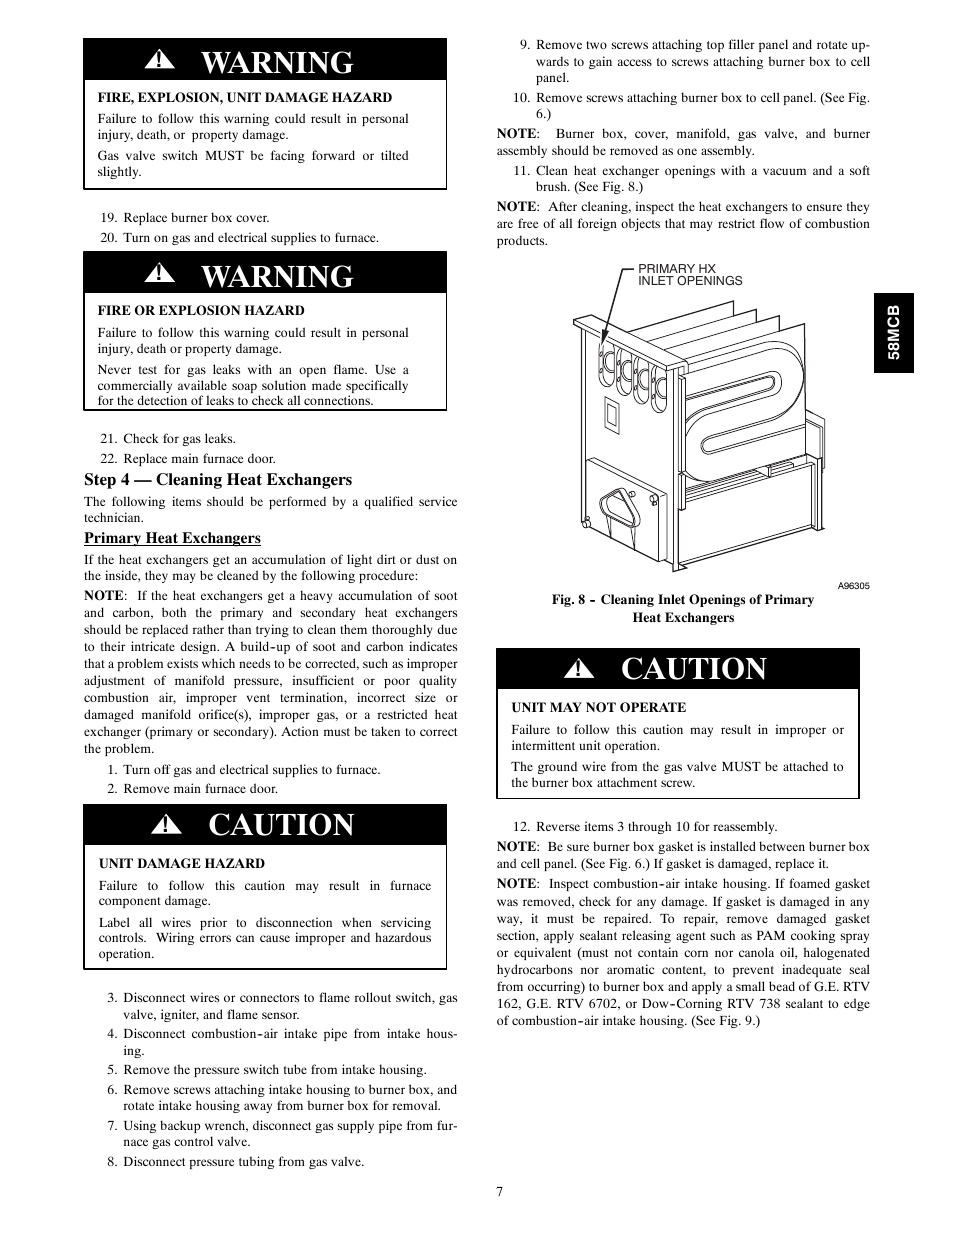 Warning, Caution | Carrier 58MCB User Manual | Page 7 / 20